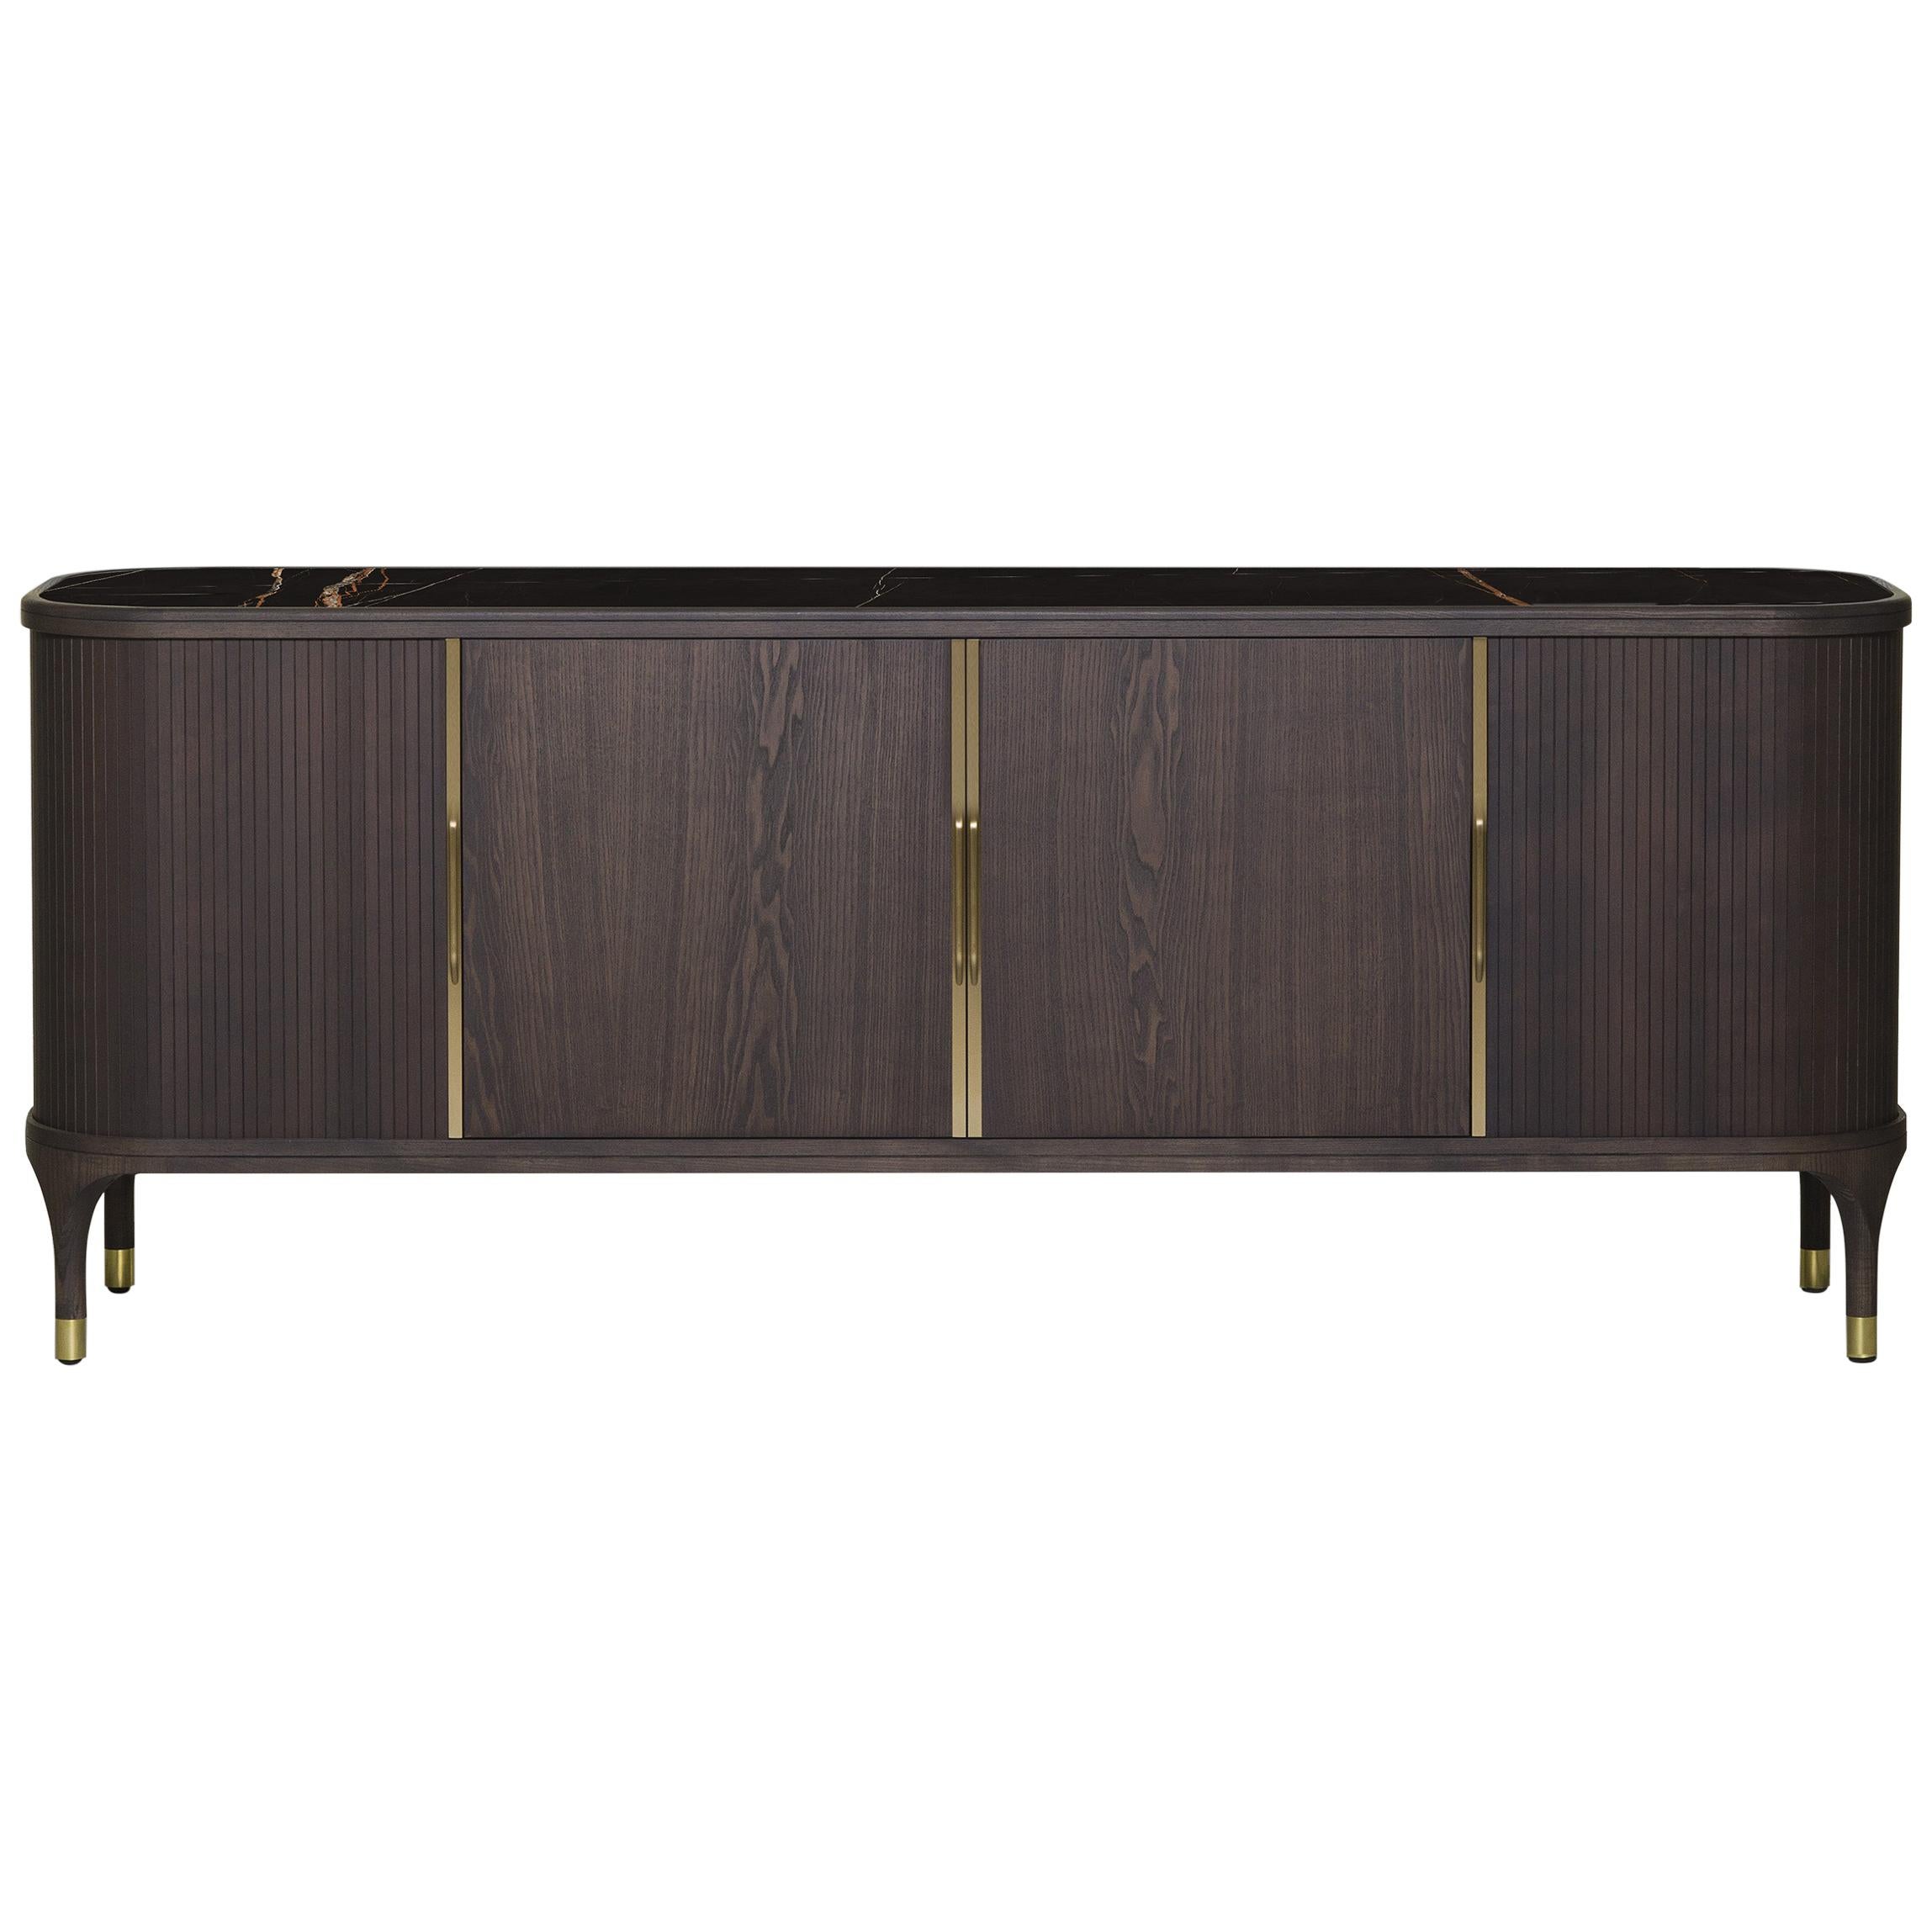 Joyce Sideboards by Morelato, in Ashwood with Sliding Doors and Brass Details